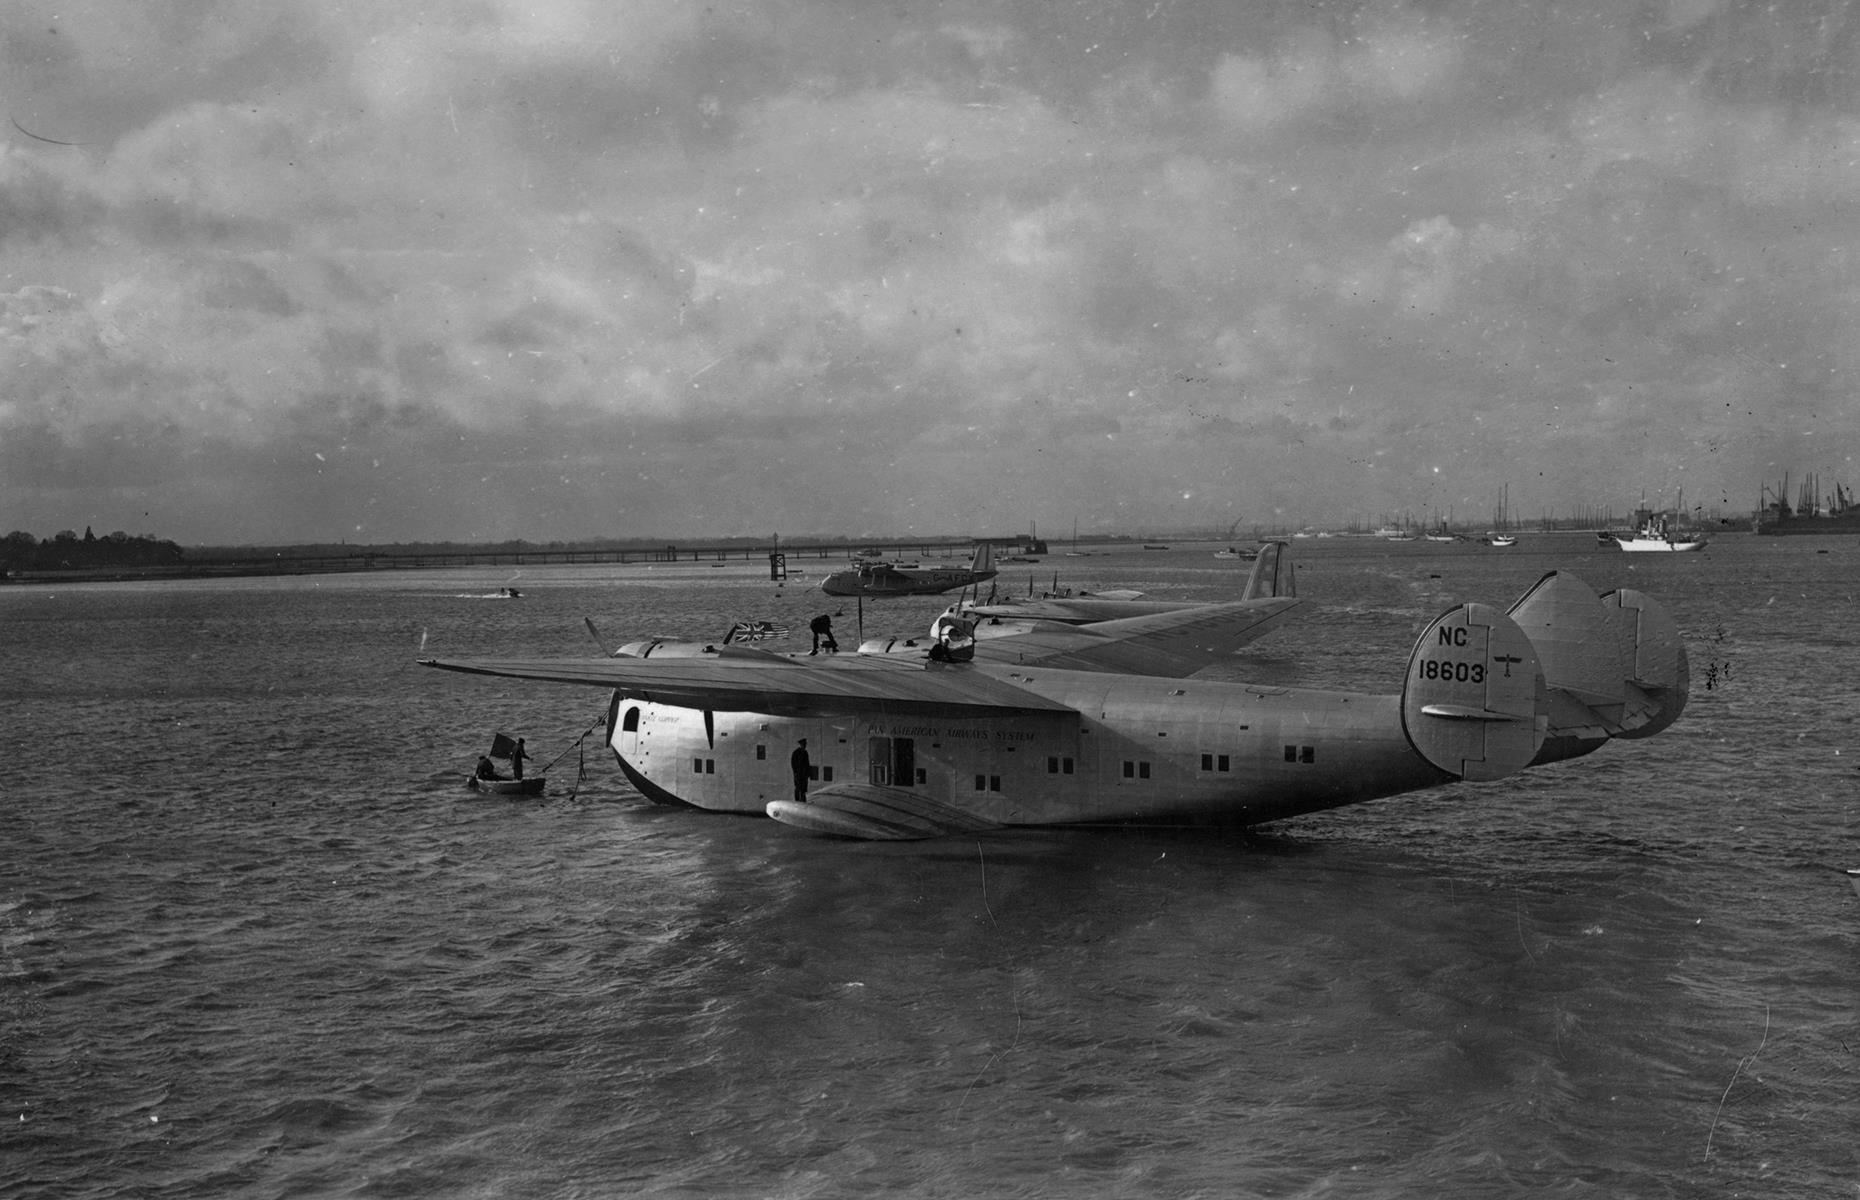 The 1930s also saw some of the earliest commercial flights across the Atlantic. Pan American Airways was one of the forerunners, transporting passengers across the Atlantic by 1939. The Yankee Clipper aircraft or "flying boat", which was used to undertake this journey, is pictured here in Calshot, Southampton, UK after a flight.